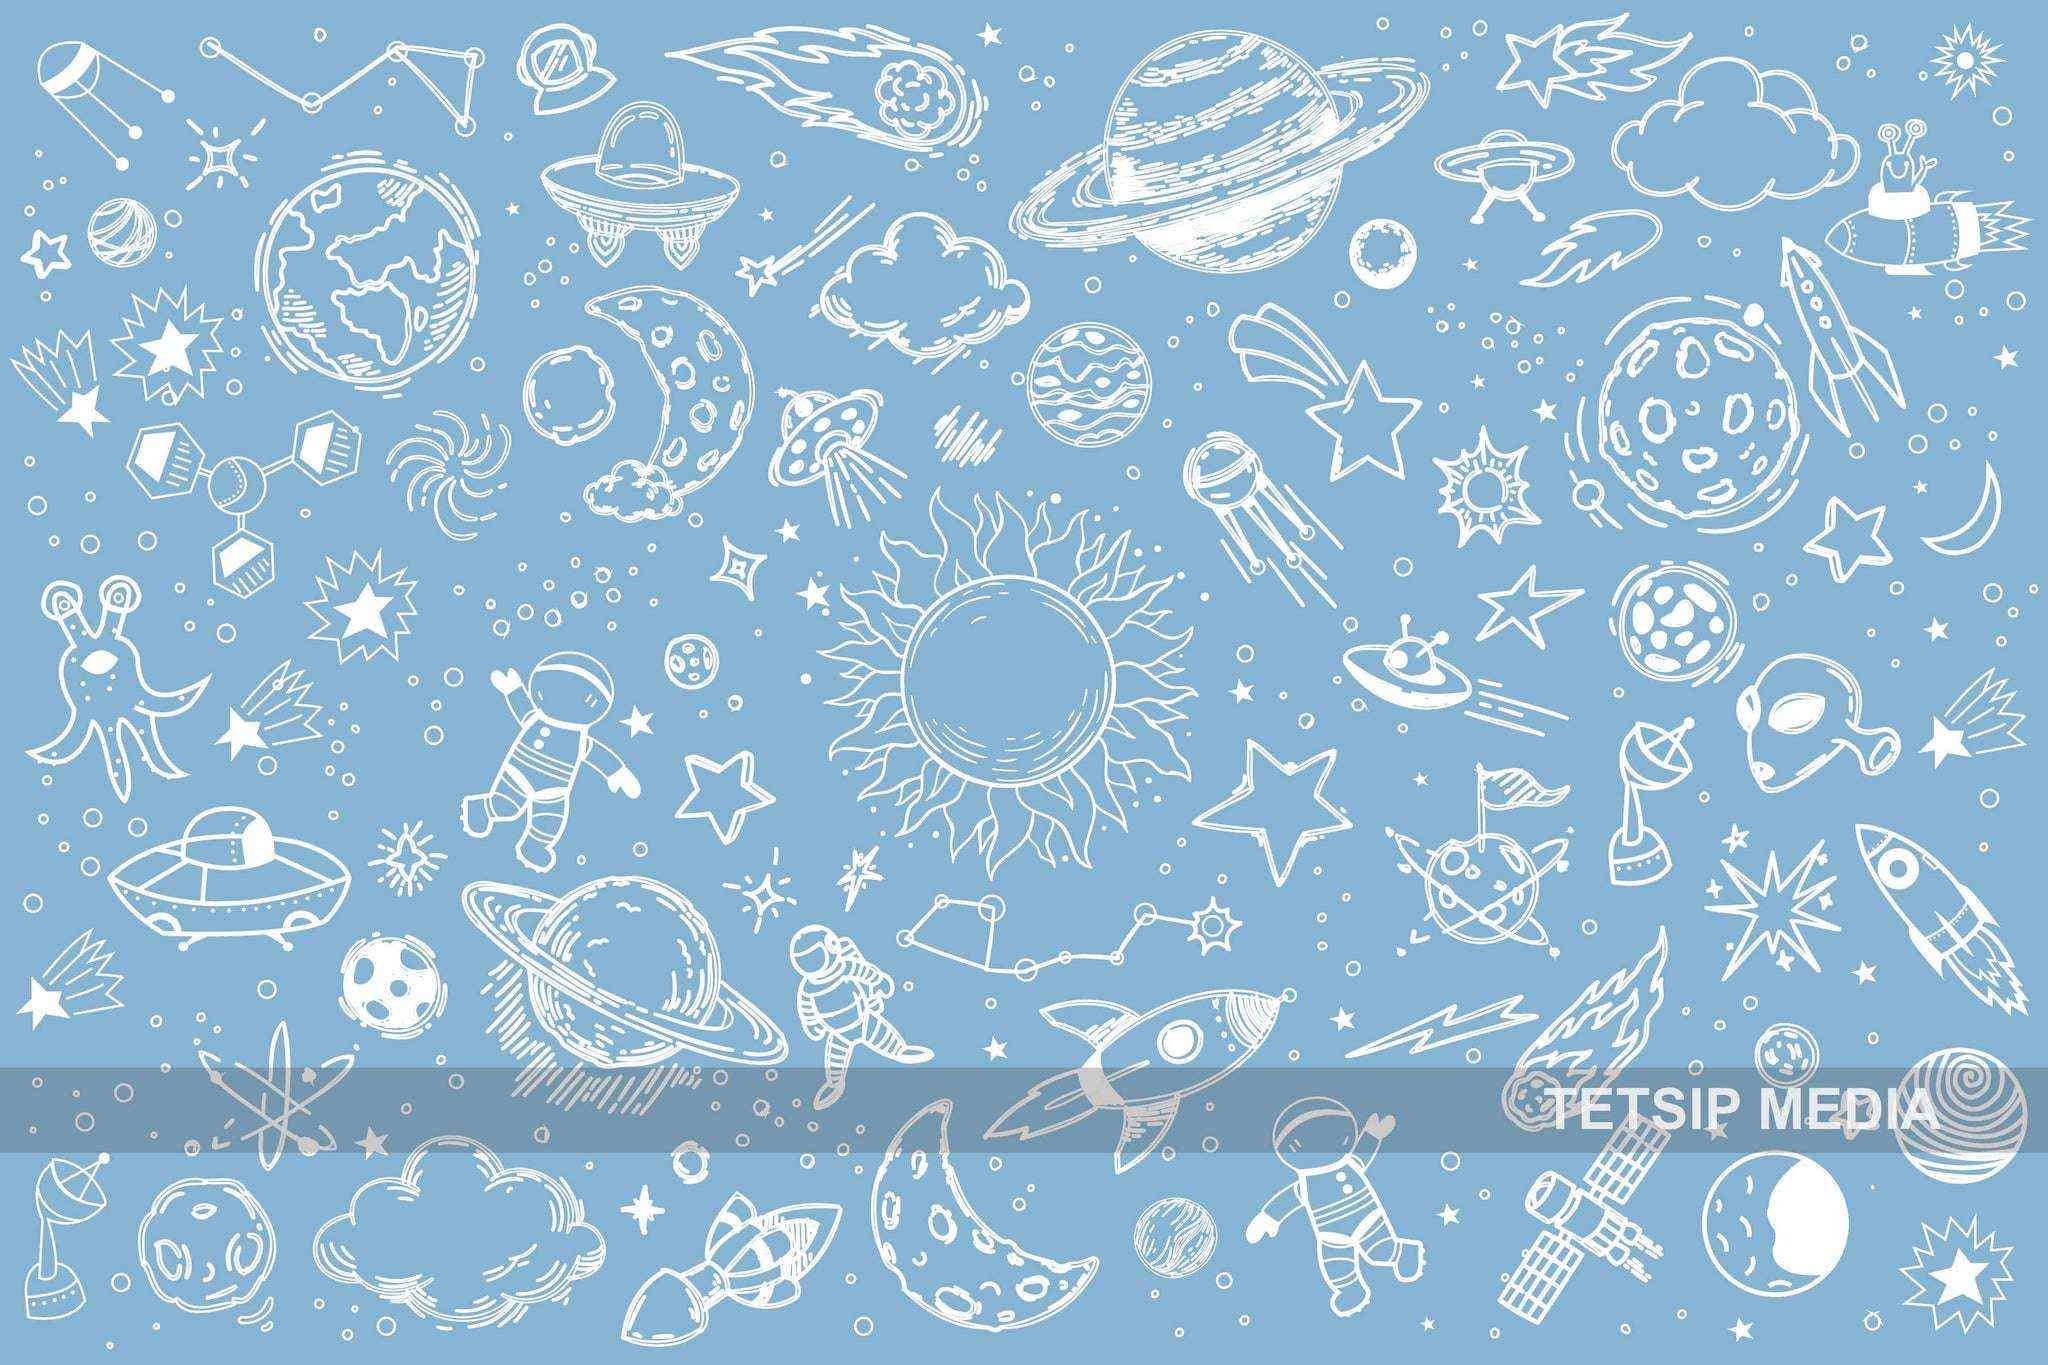 Pastel Blue Backgrond - Kids Space Theme